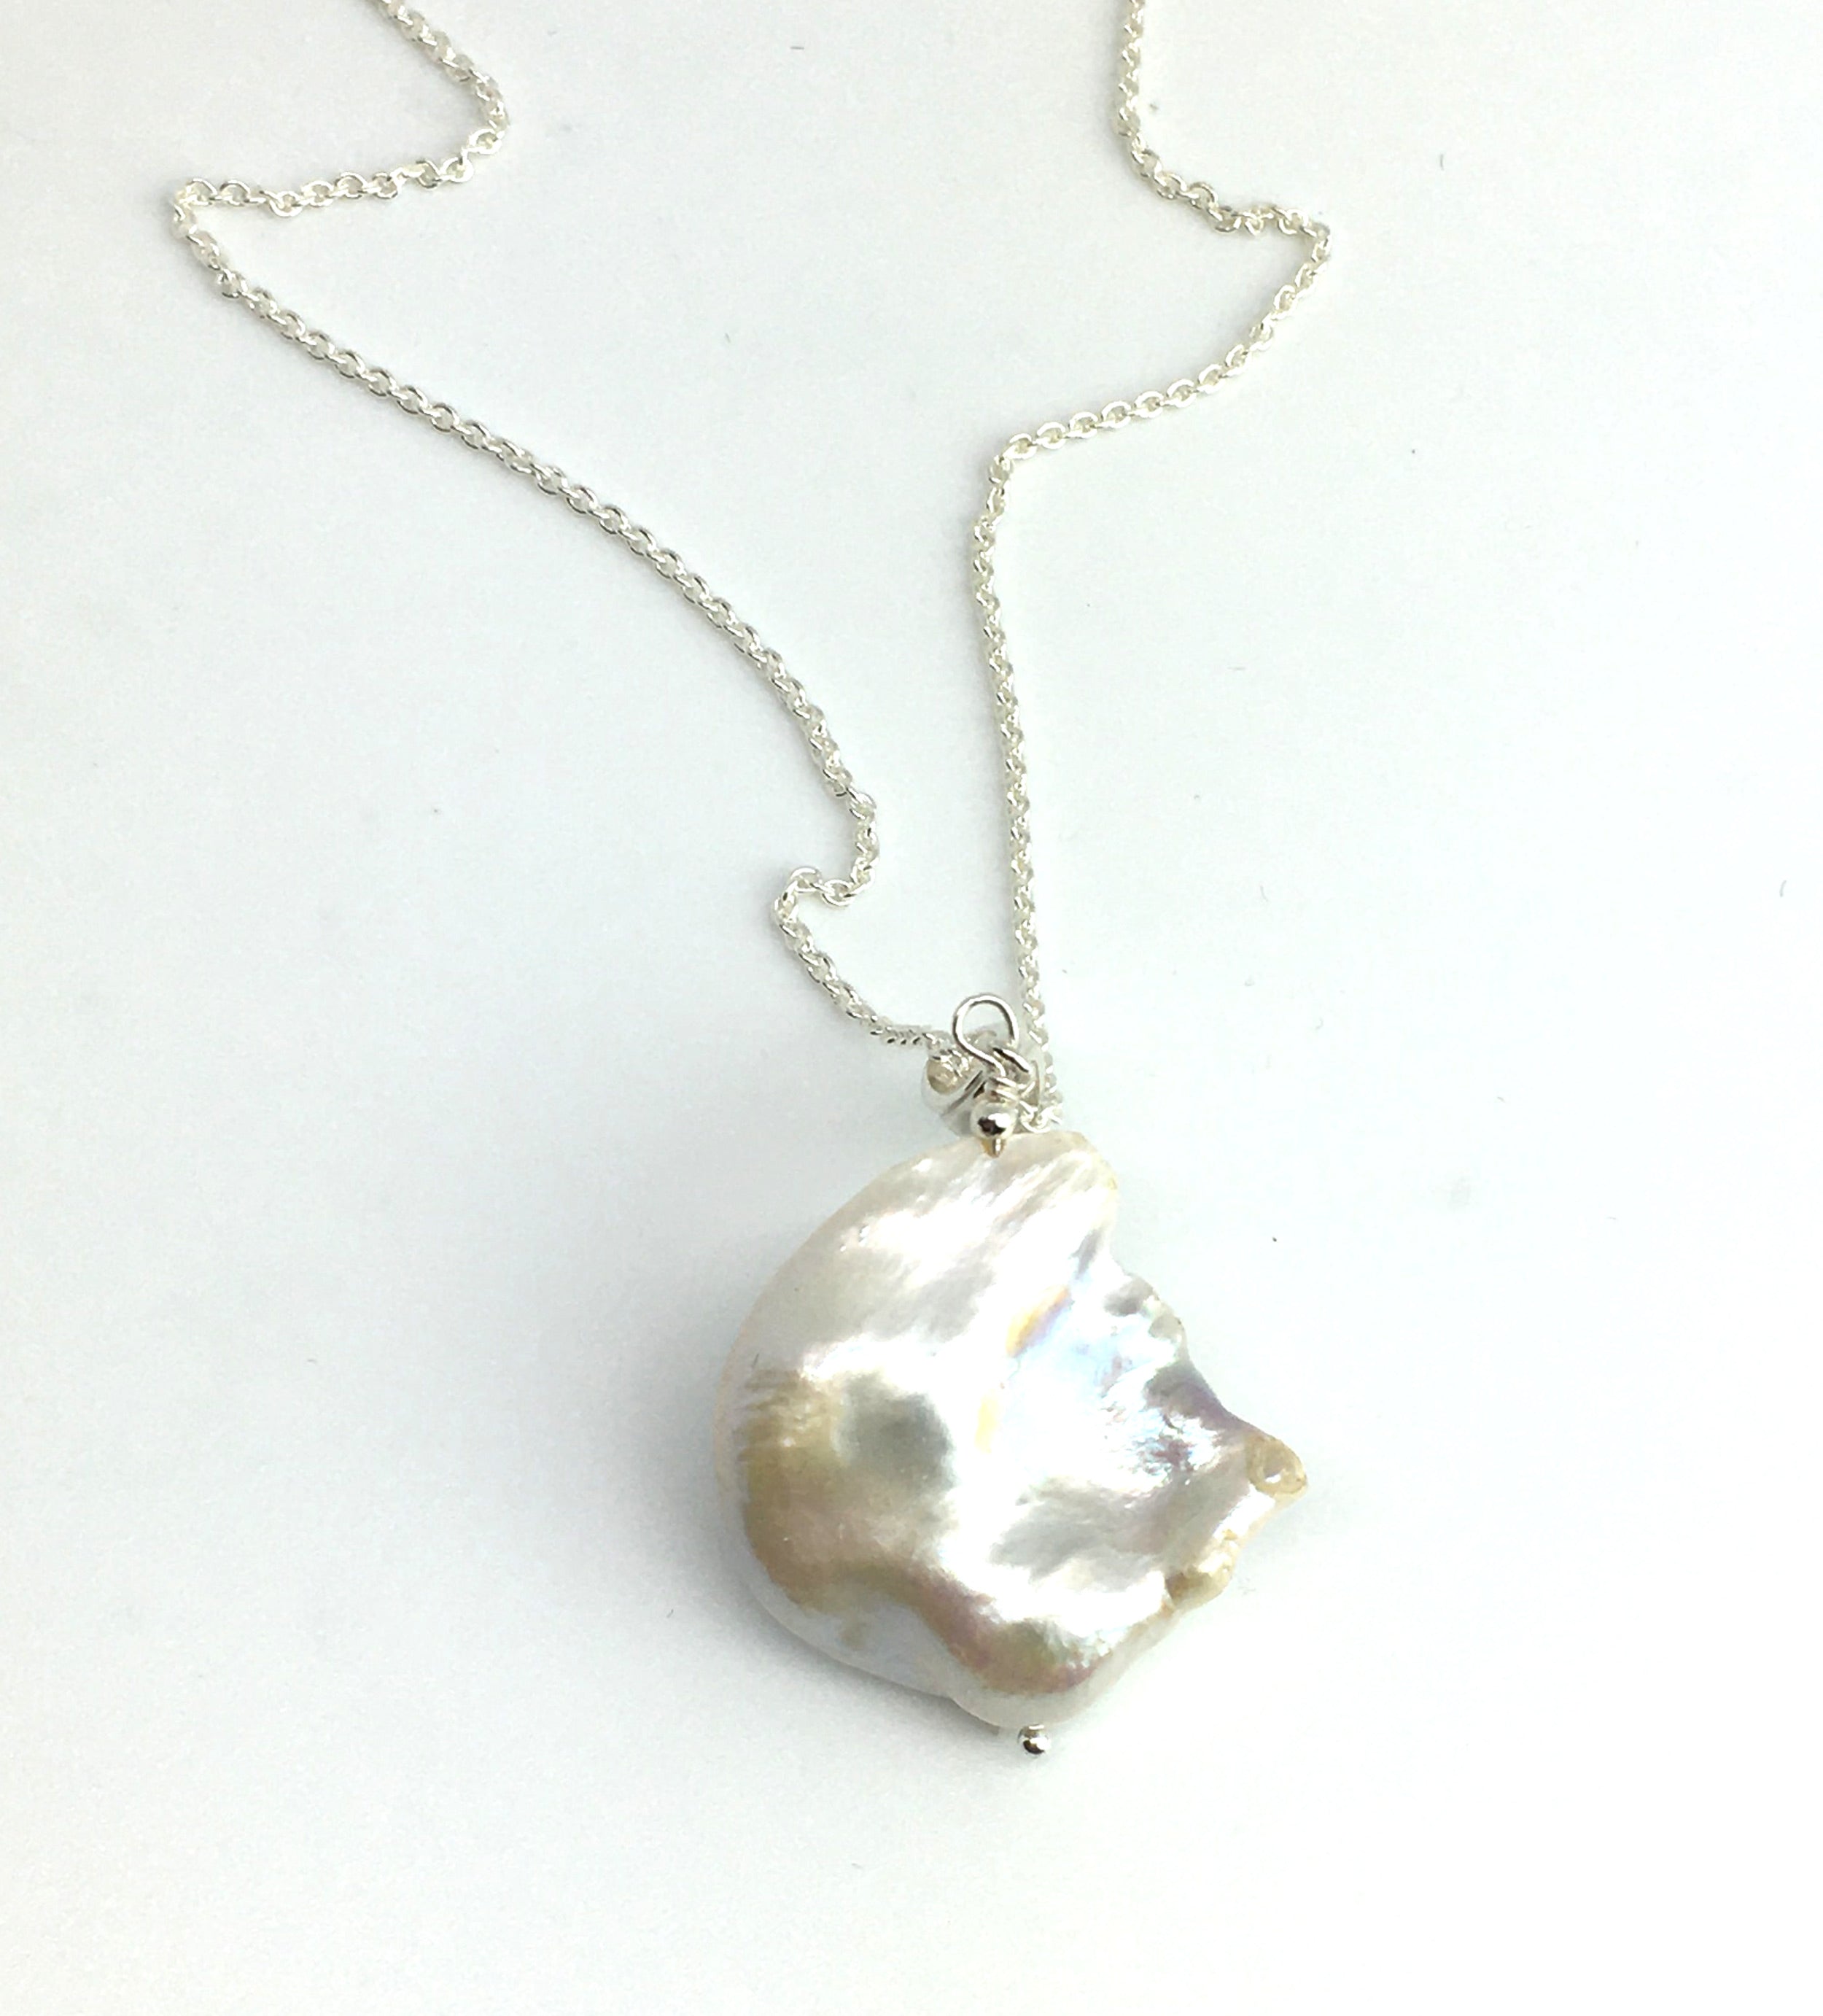 Cobblestone Pearl Pendant Necklace - One of a Kind